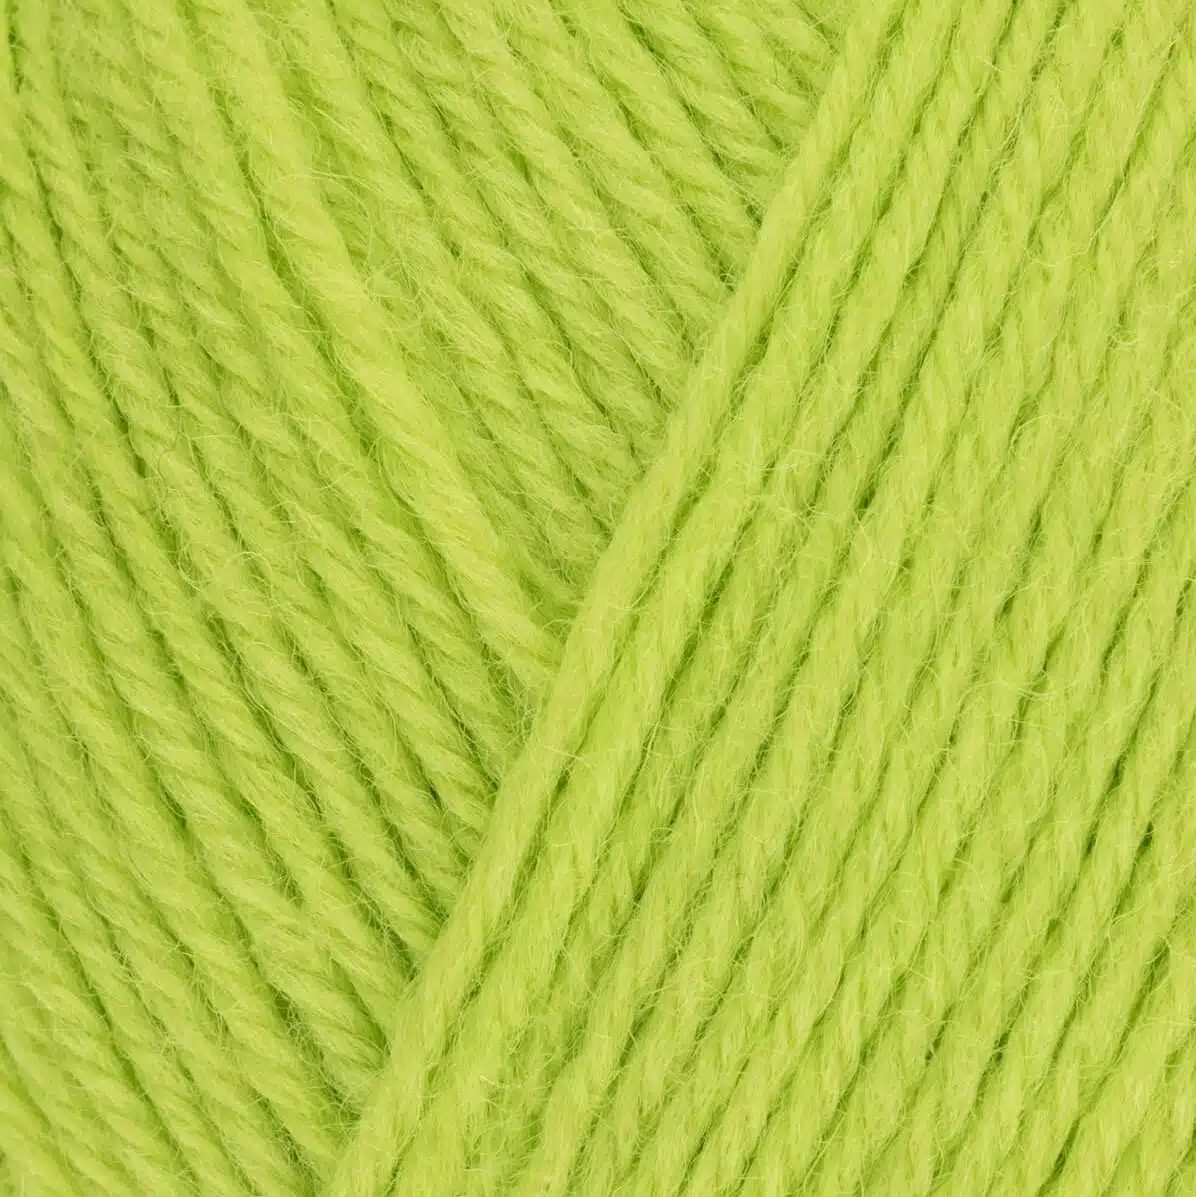 West Yorkshire Spinners ColourLab - Lime Green 198